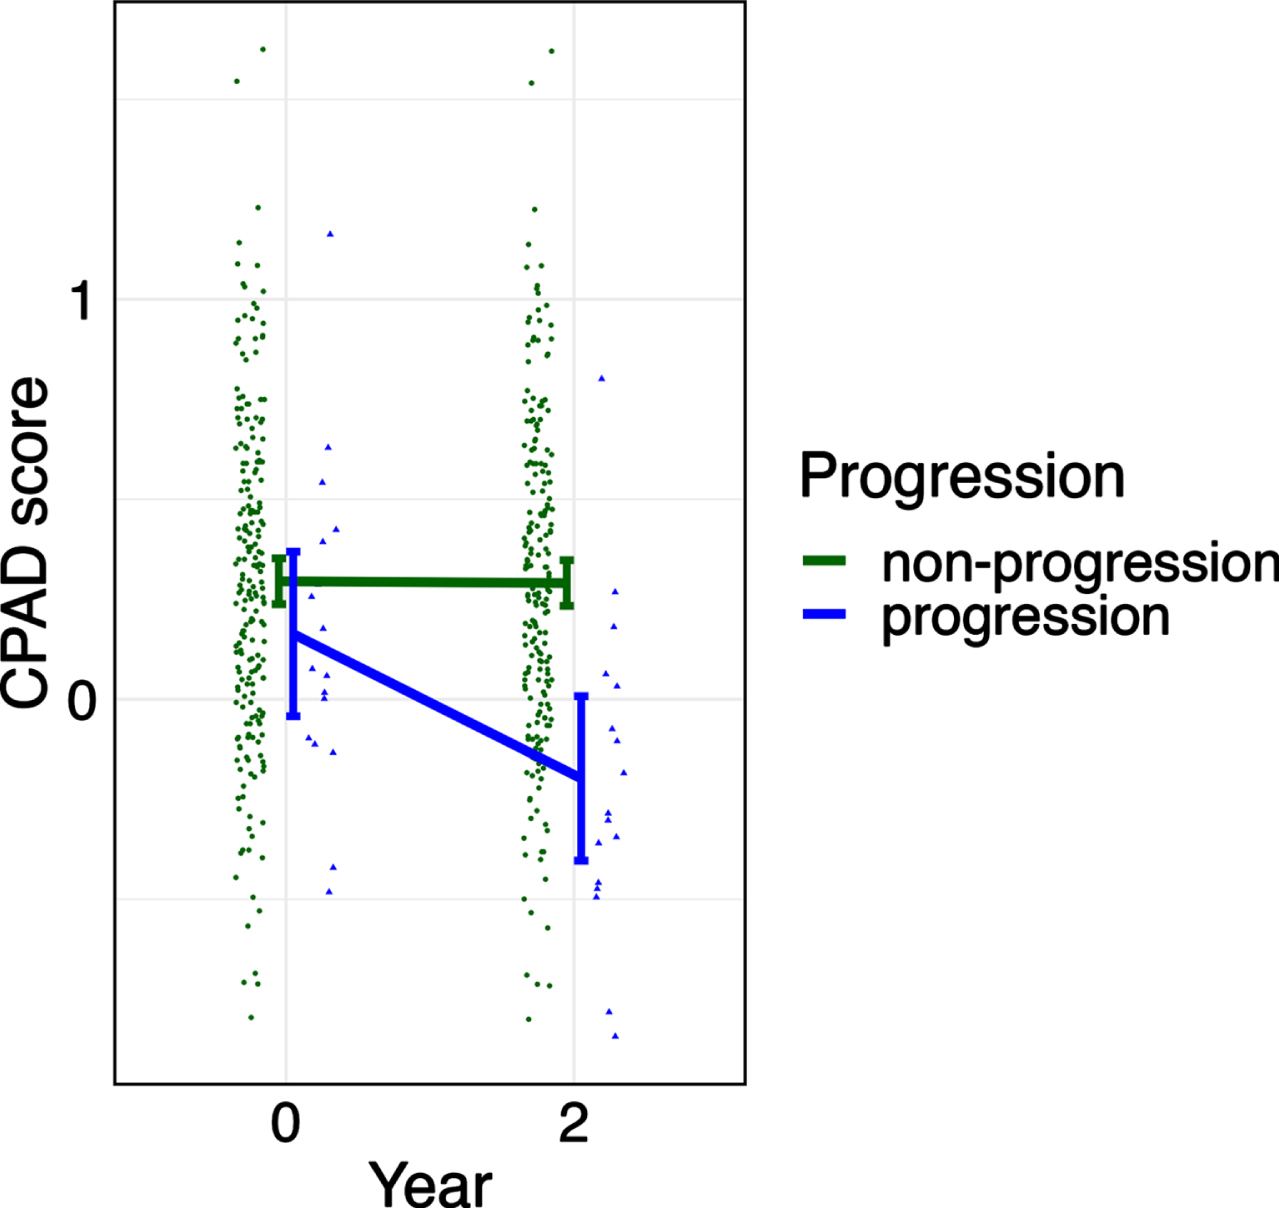 The result of the linear mixed model of time and progression interaction for CPAD. The bars indicate 95% confidence intervals. The fixed effect of the interaction of time and progression was significant.